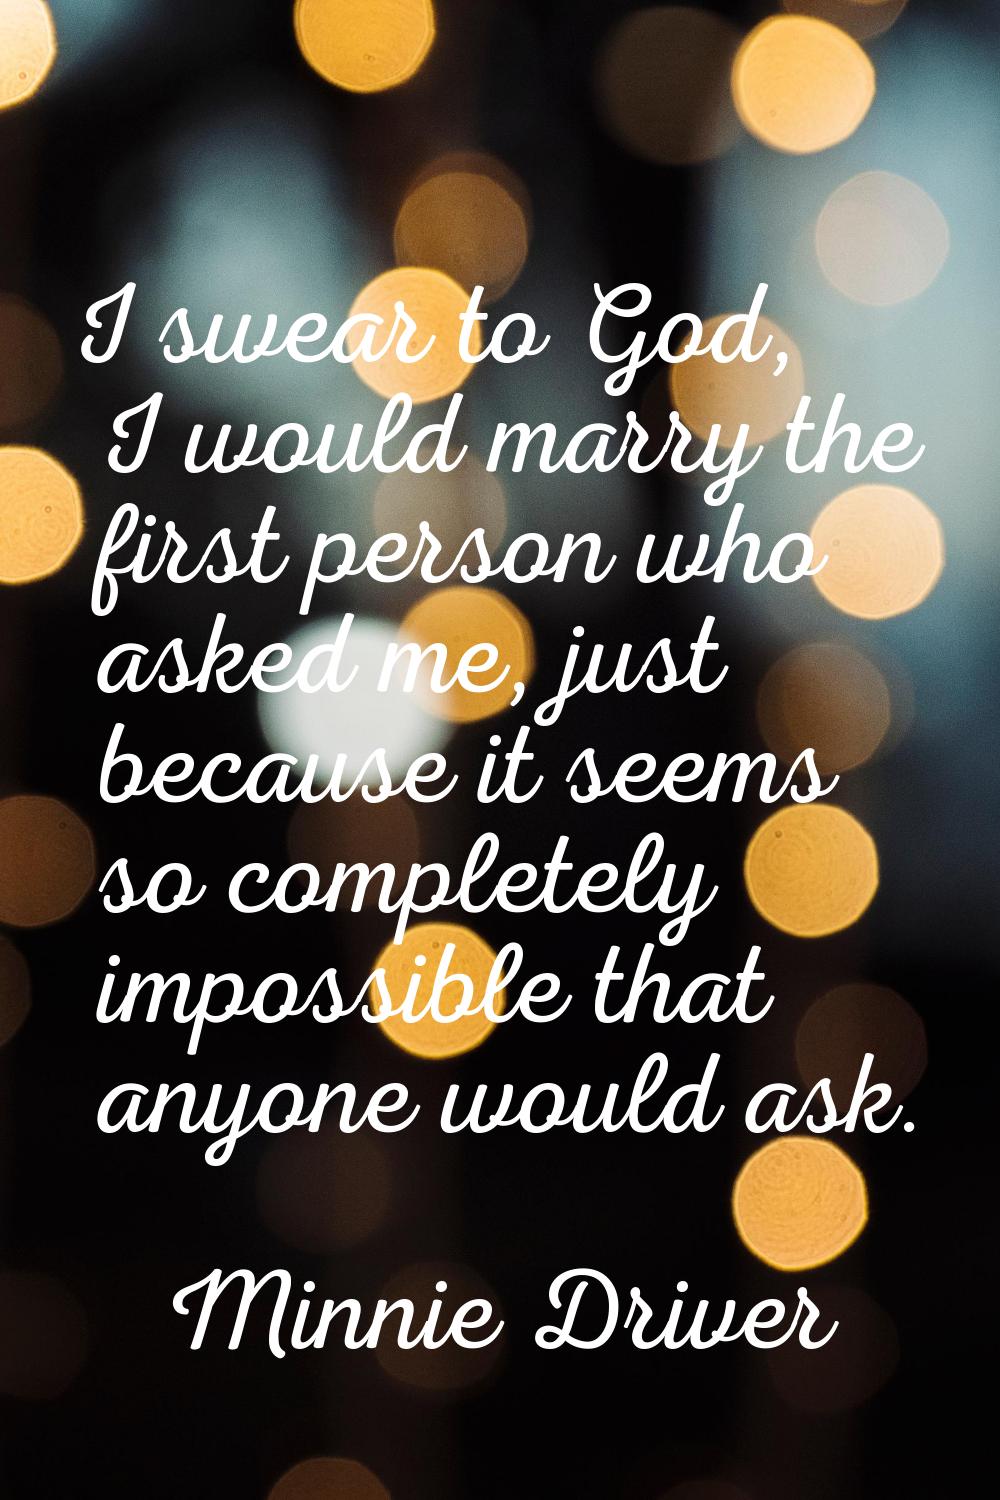 I swear to God, I would marry the first person who asked me, just because it seems so completely im